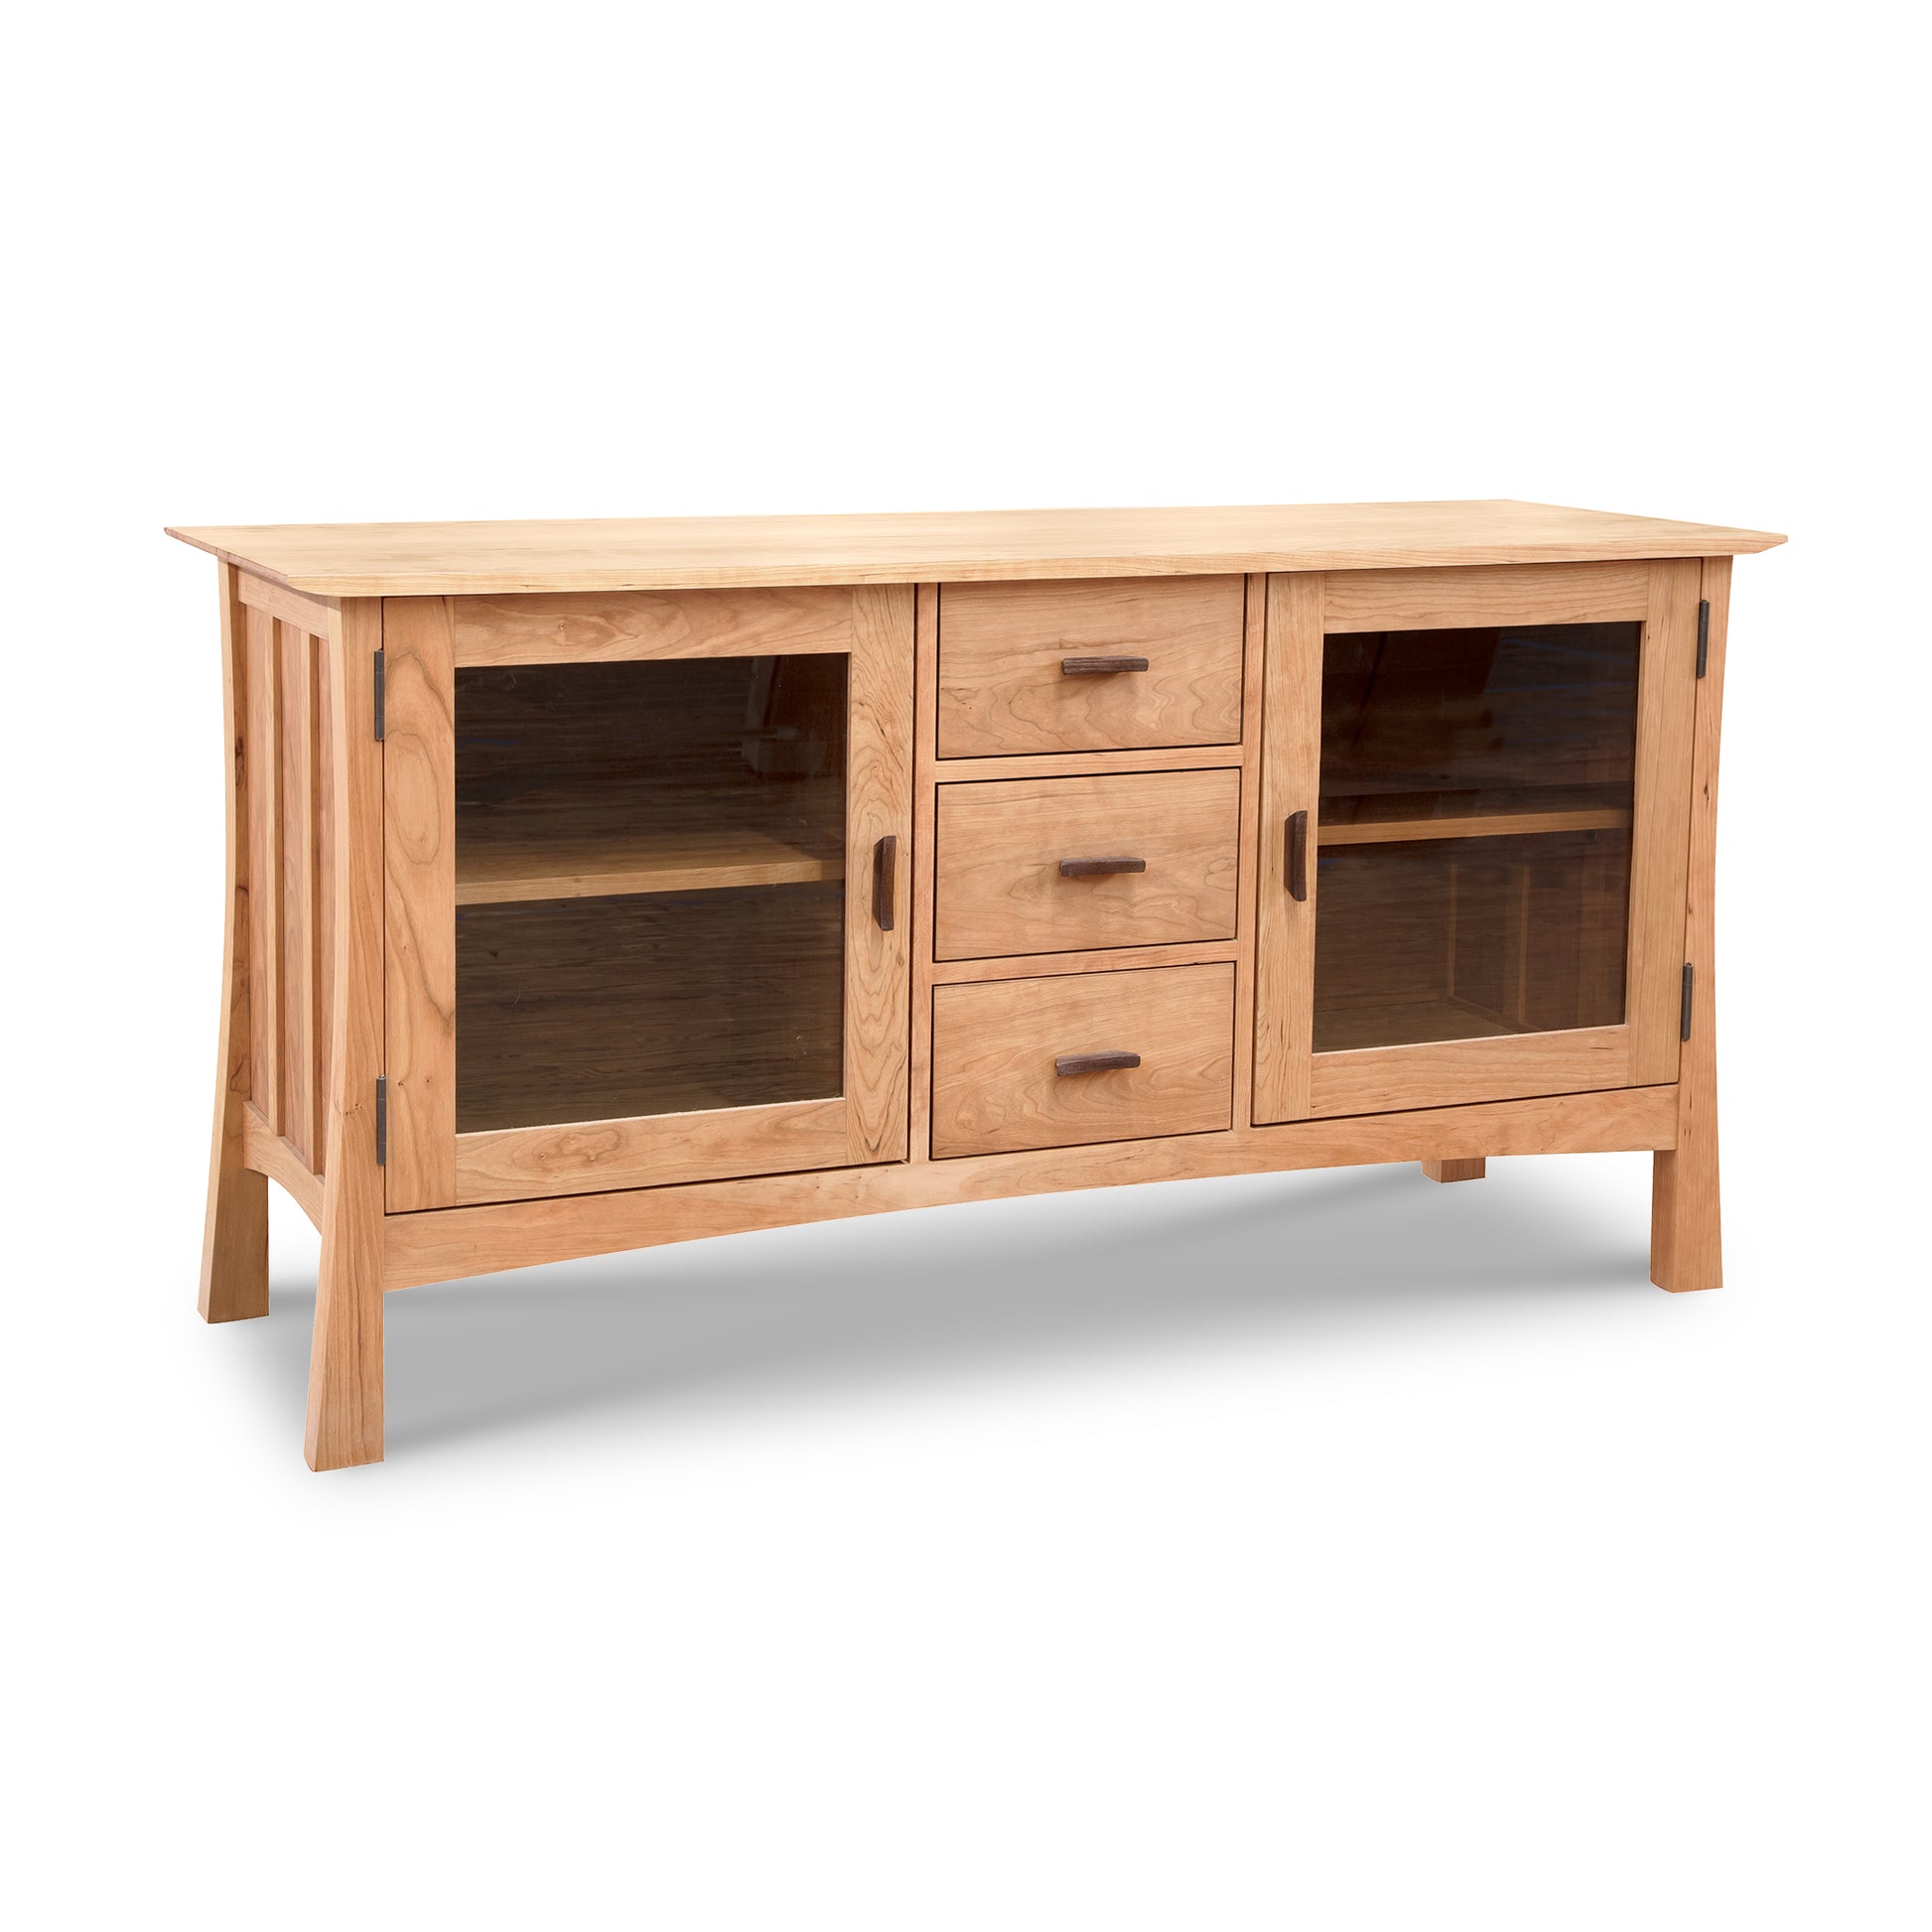 Vermont Furniture Designs Contemporary Craftsman 3-Drawer Media Console with glass-paneled doors, made from solid wood in a natural cherry finish on a white background.